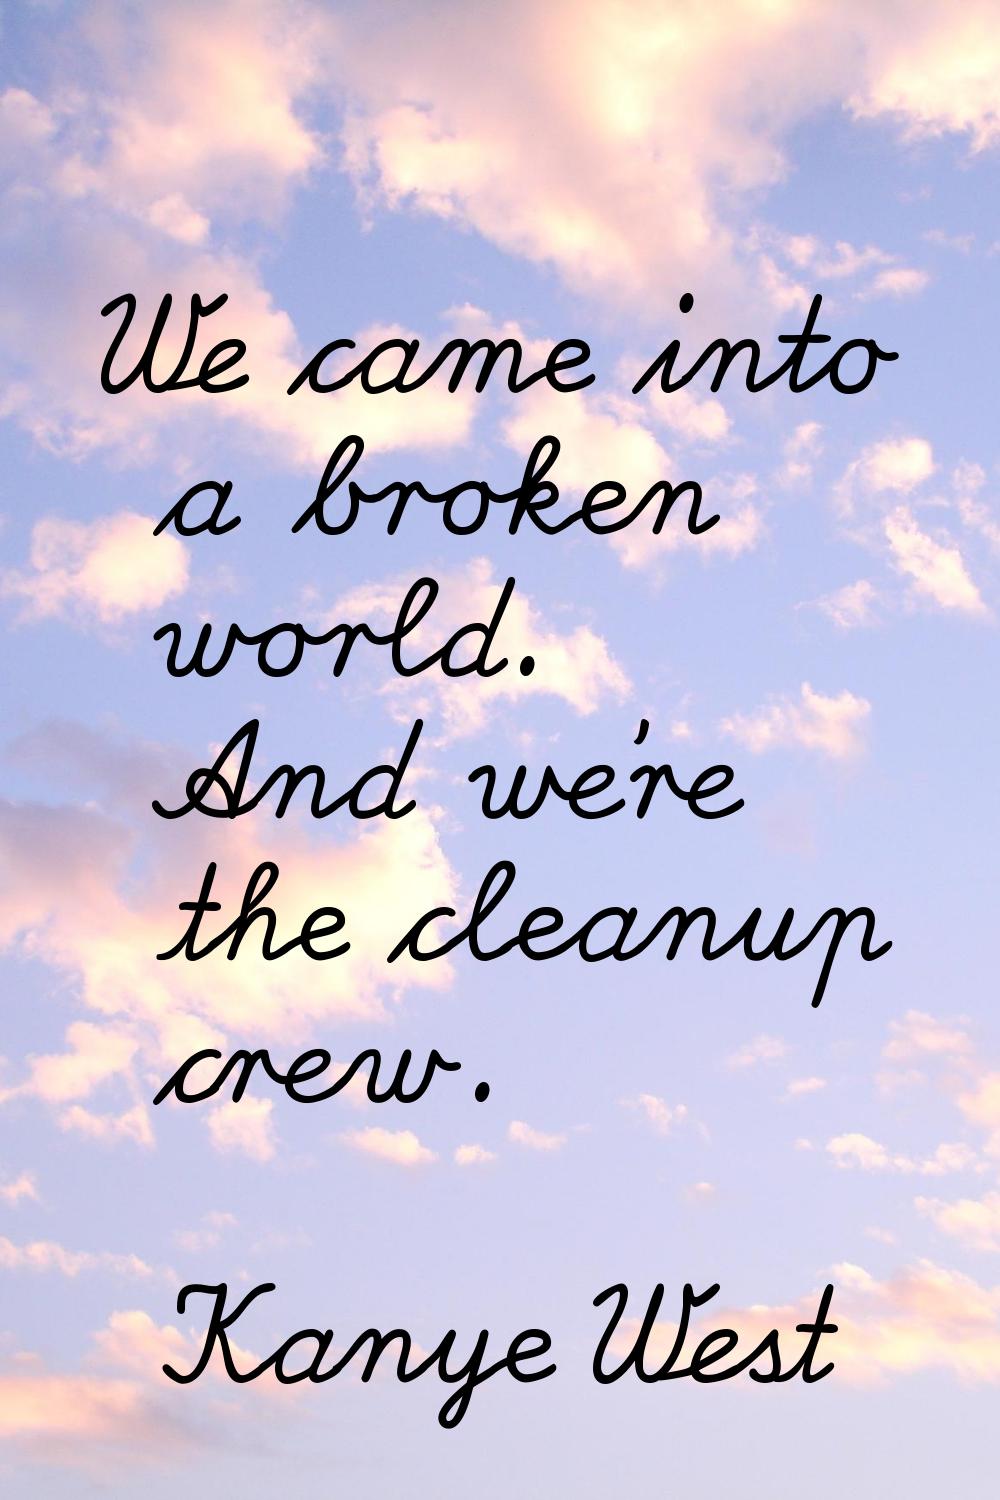 We came into a broken world. And we're the cleanup crew.